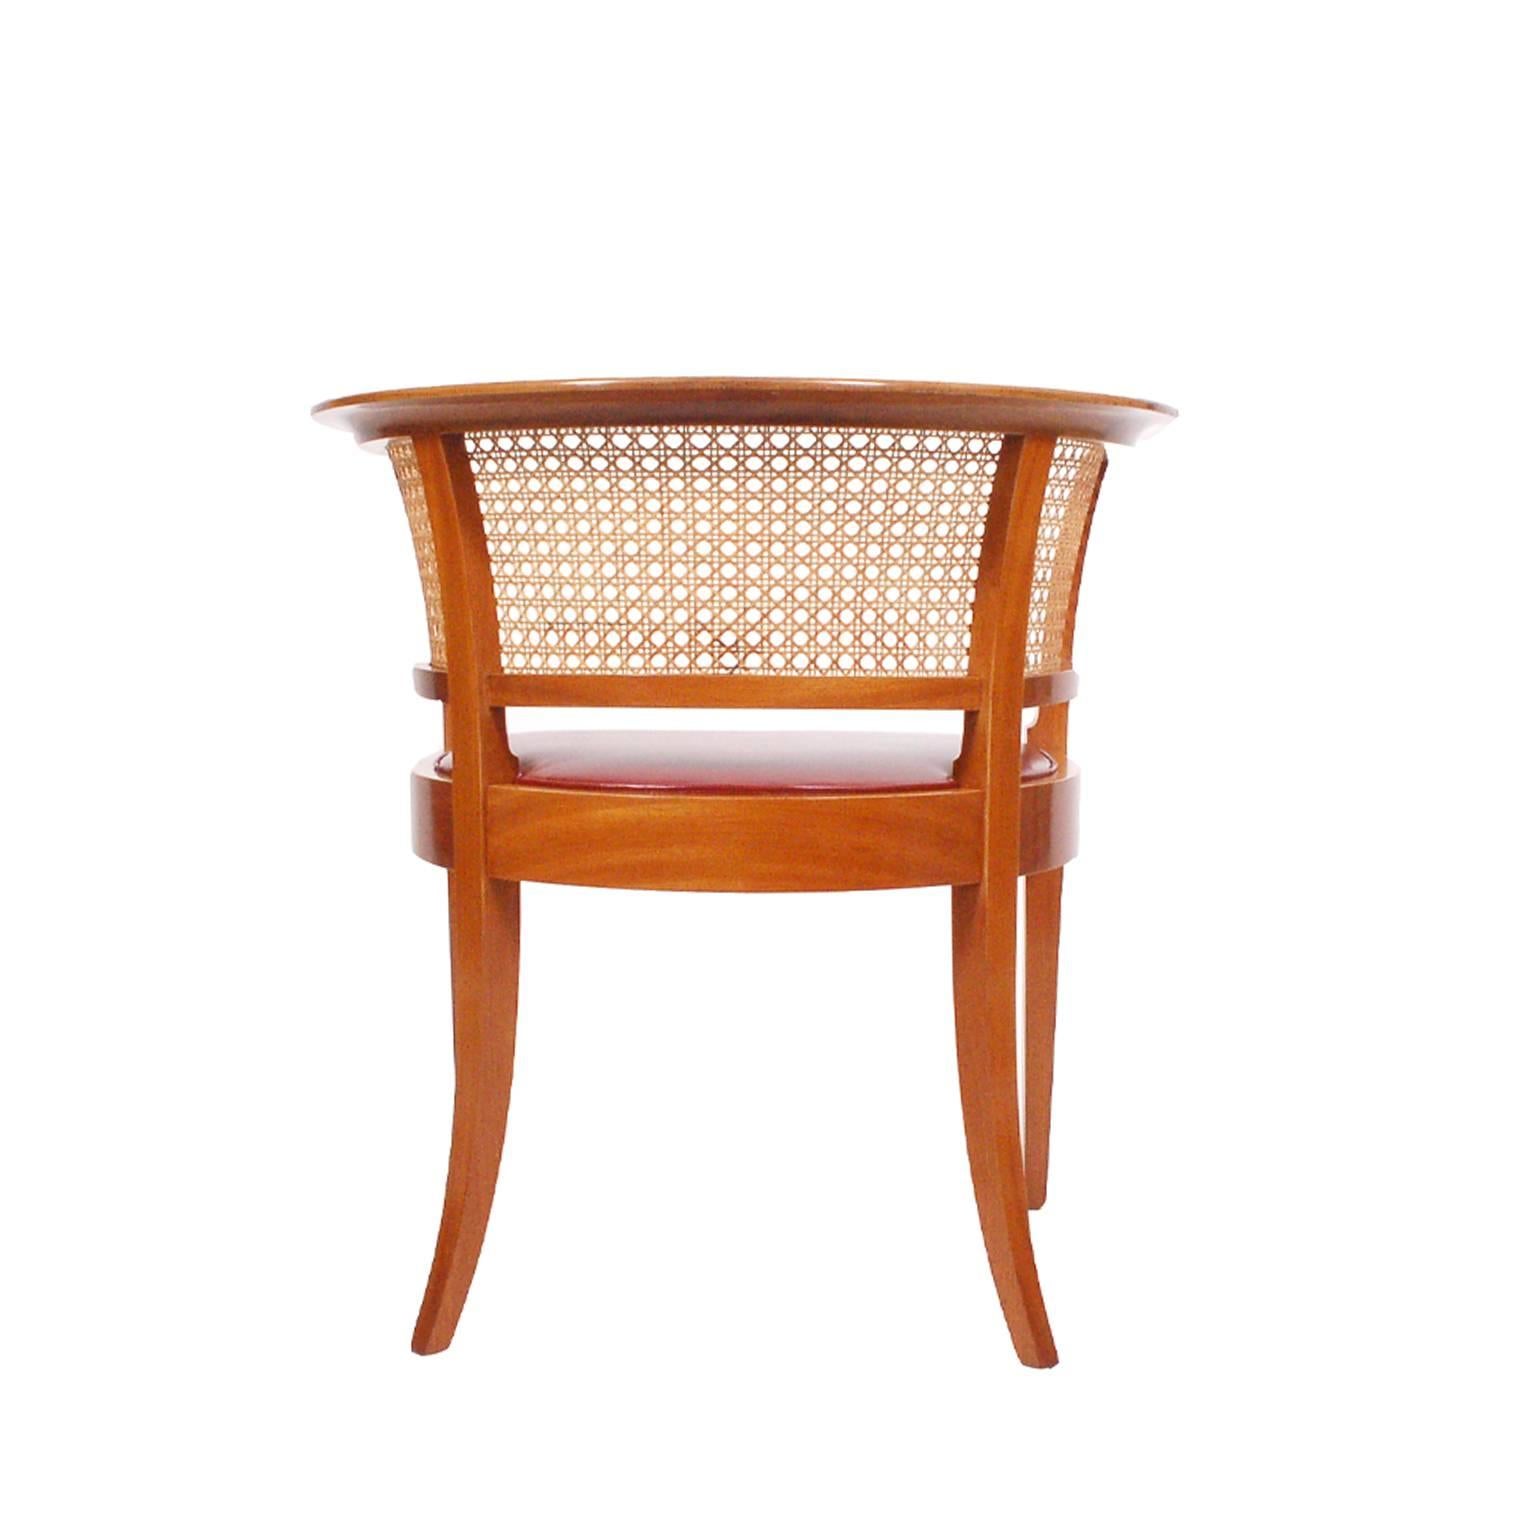 Originally designed in 1914 and in production since 1931. This is from the second half of the 20th century. Solid mahogany, cane back and leather seat. 
Made by Rud Rasmussen.